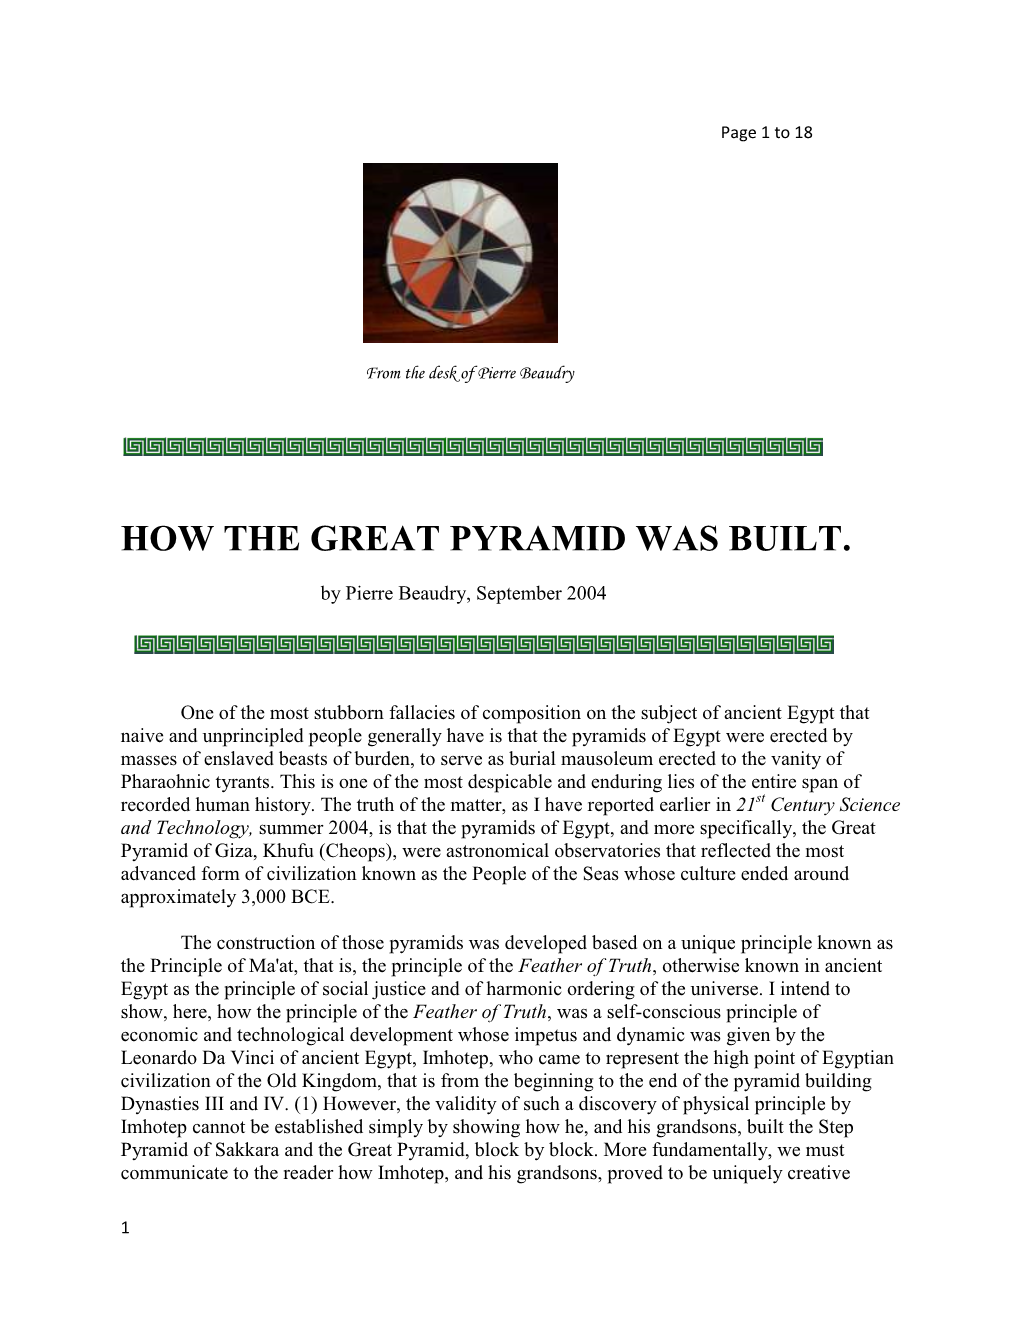 How the Great Pyramid of Egypt Was Built